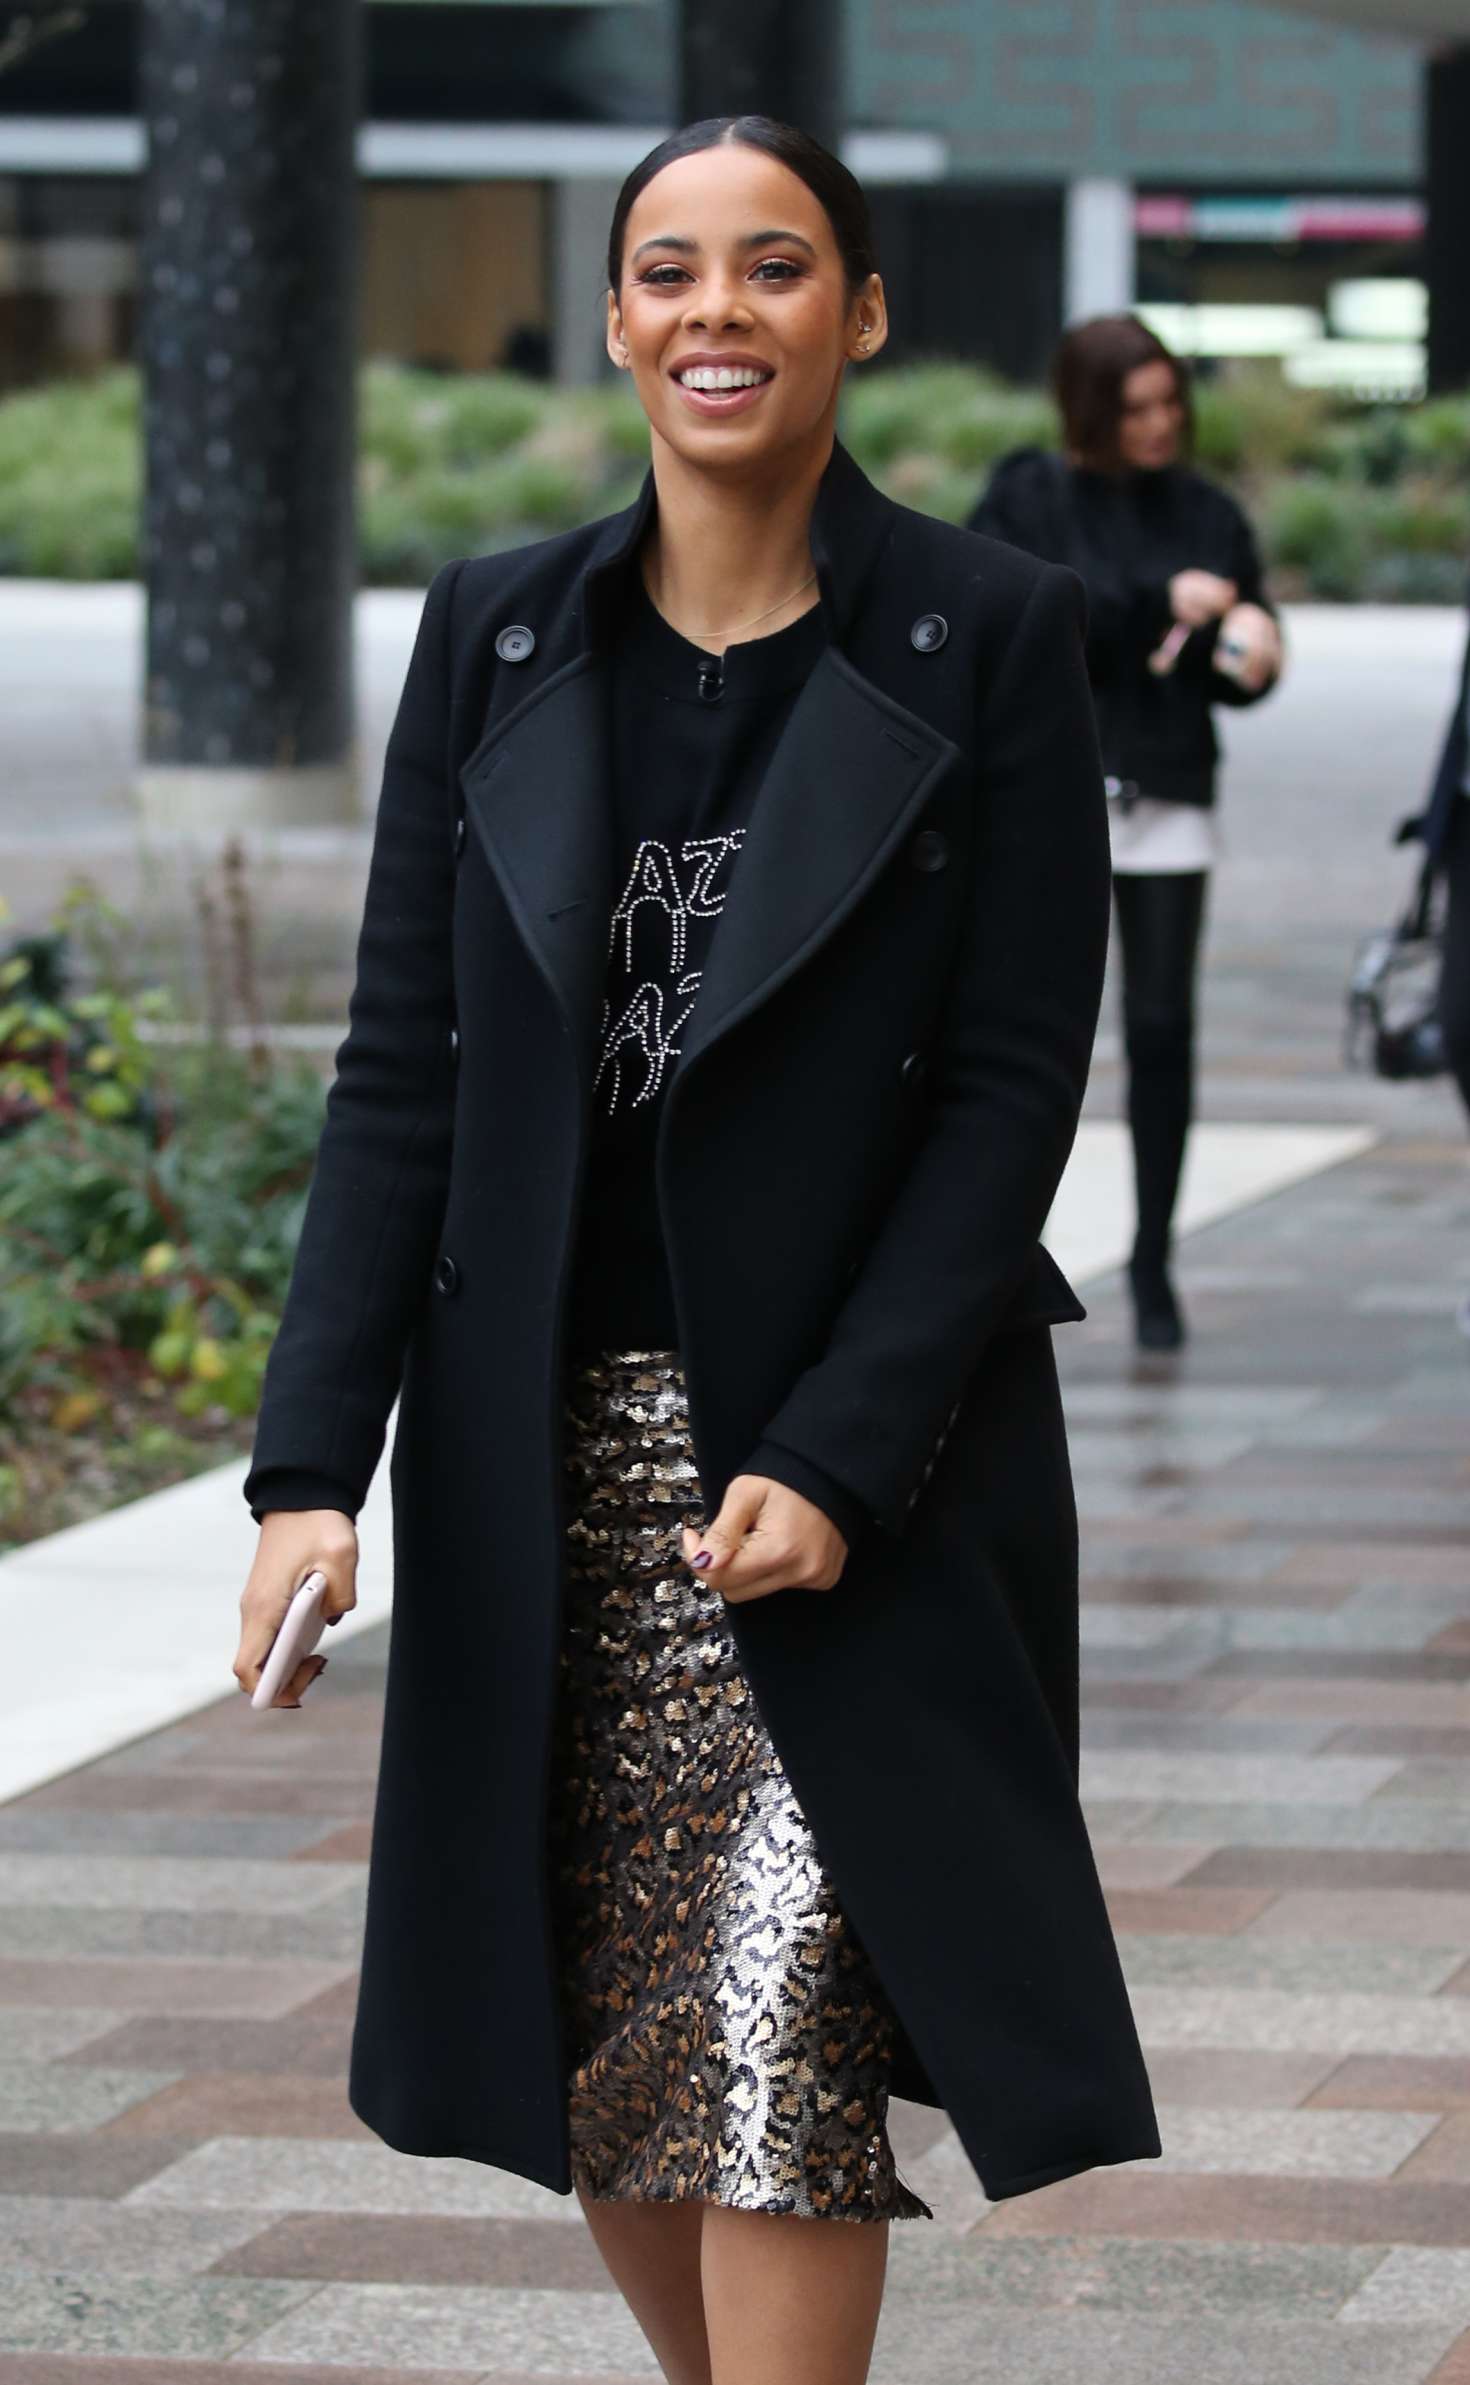 Rochelle Humes - Filming at ITV Studios in London